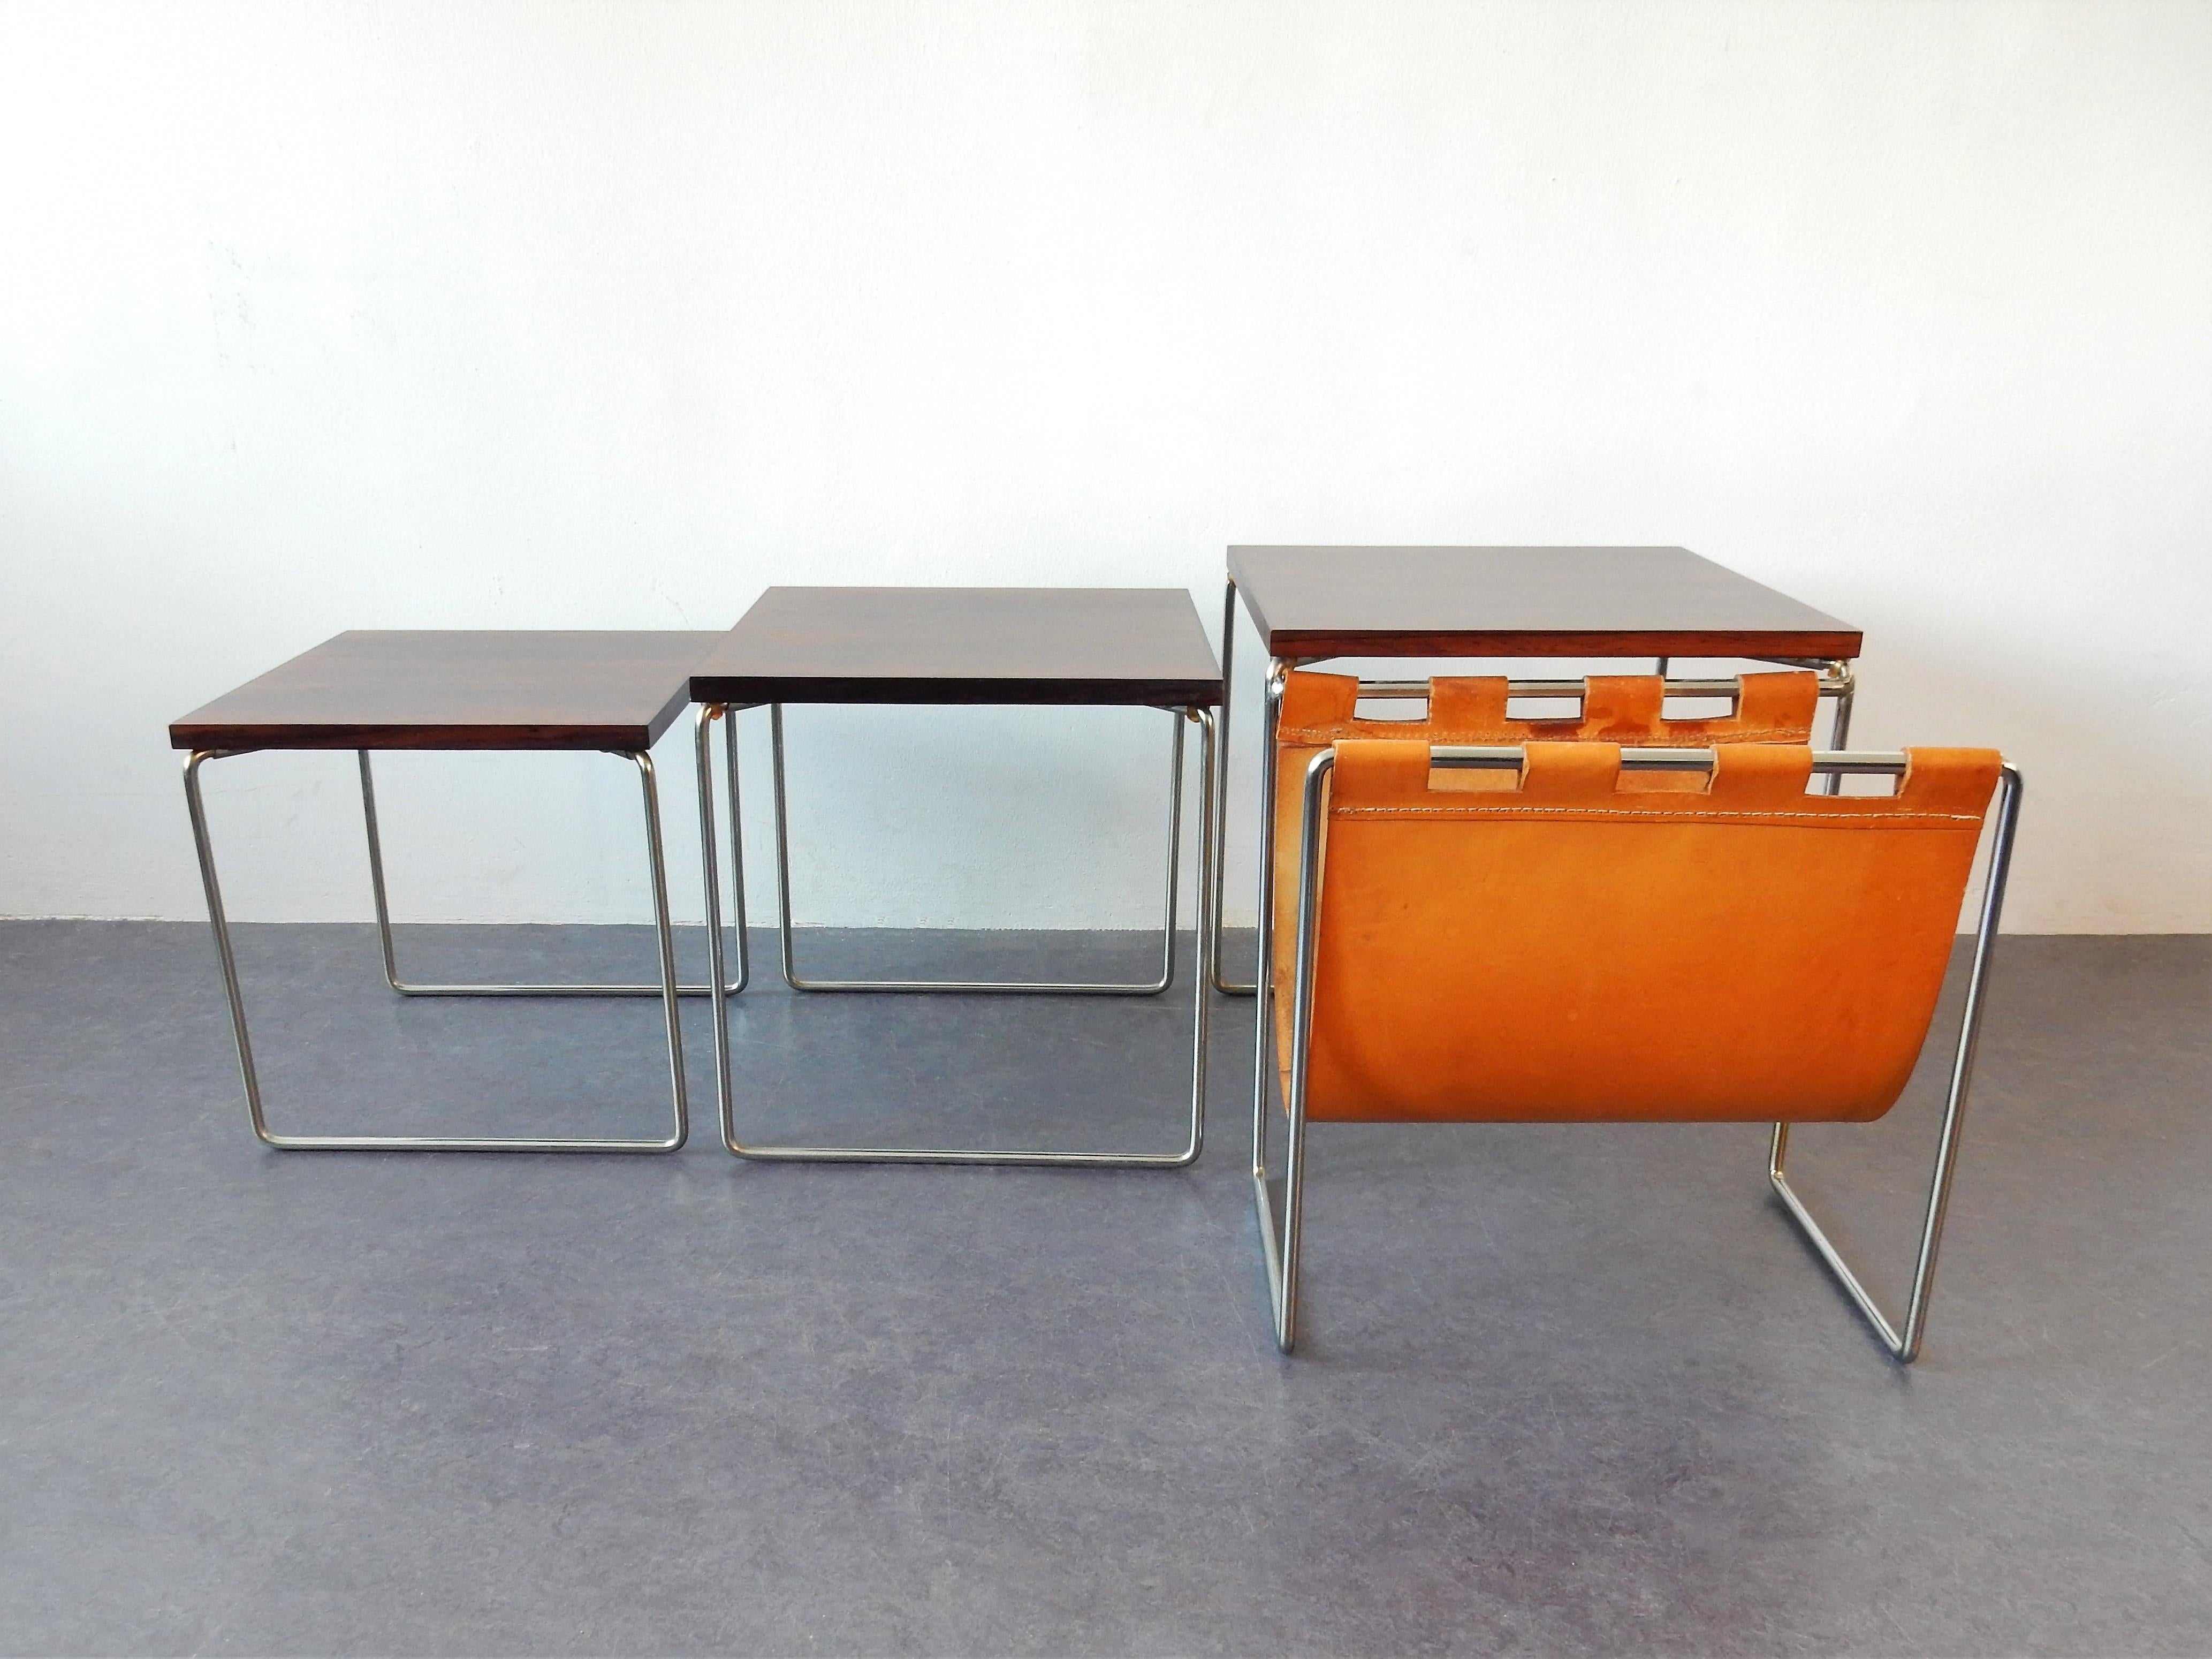 This nice set of three nesting tables was made by Brabantia in the 1960s. The tables have a square chrome base with a rosewood top. The leather magazine holder that is attached to the biggest table makes it complete and stunning! This set has been